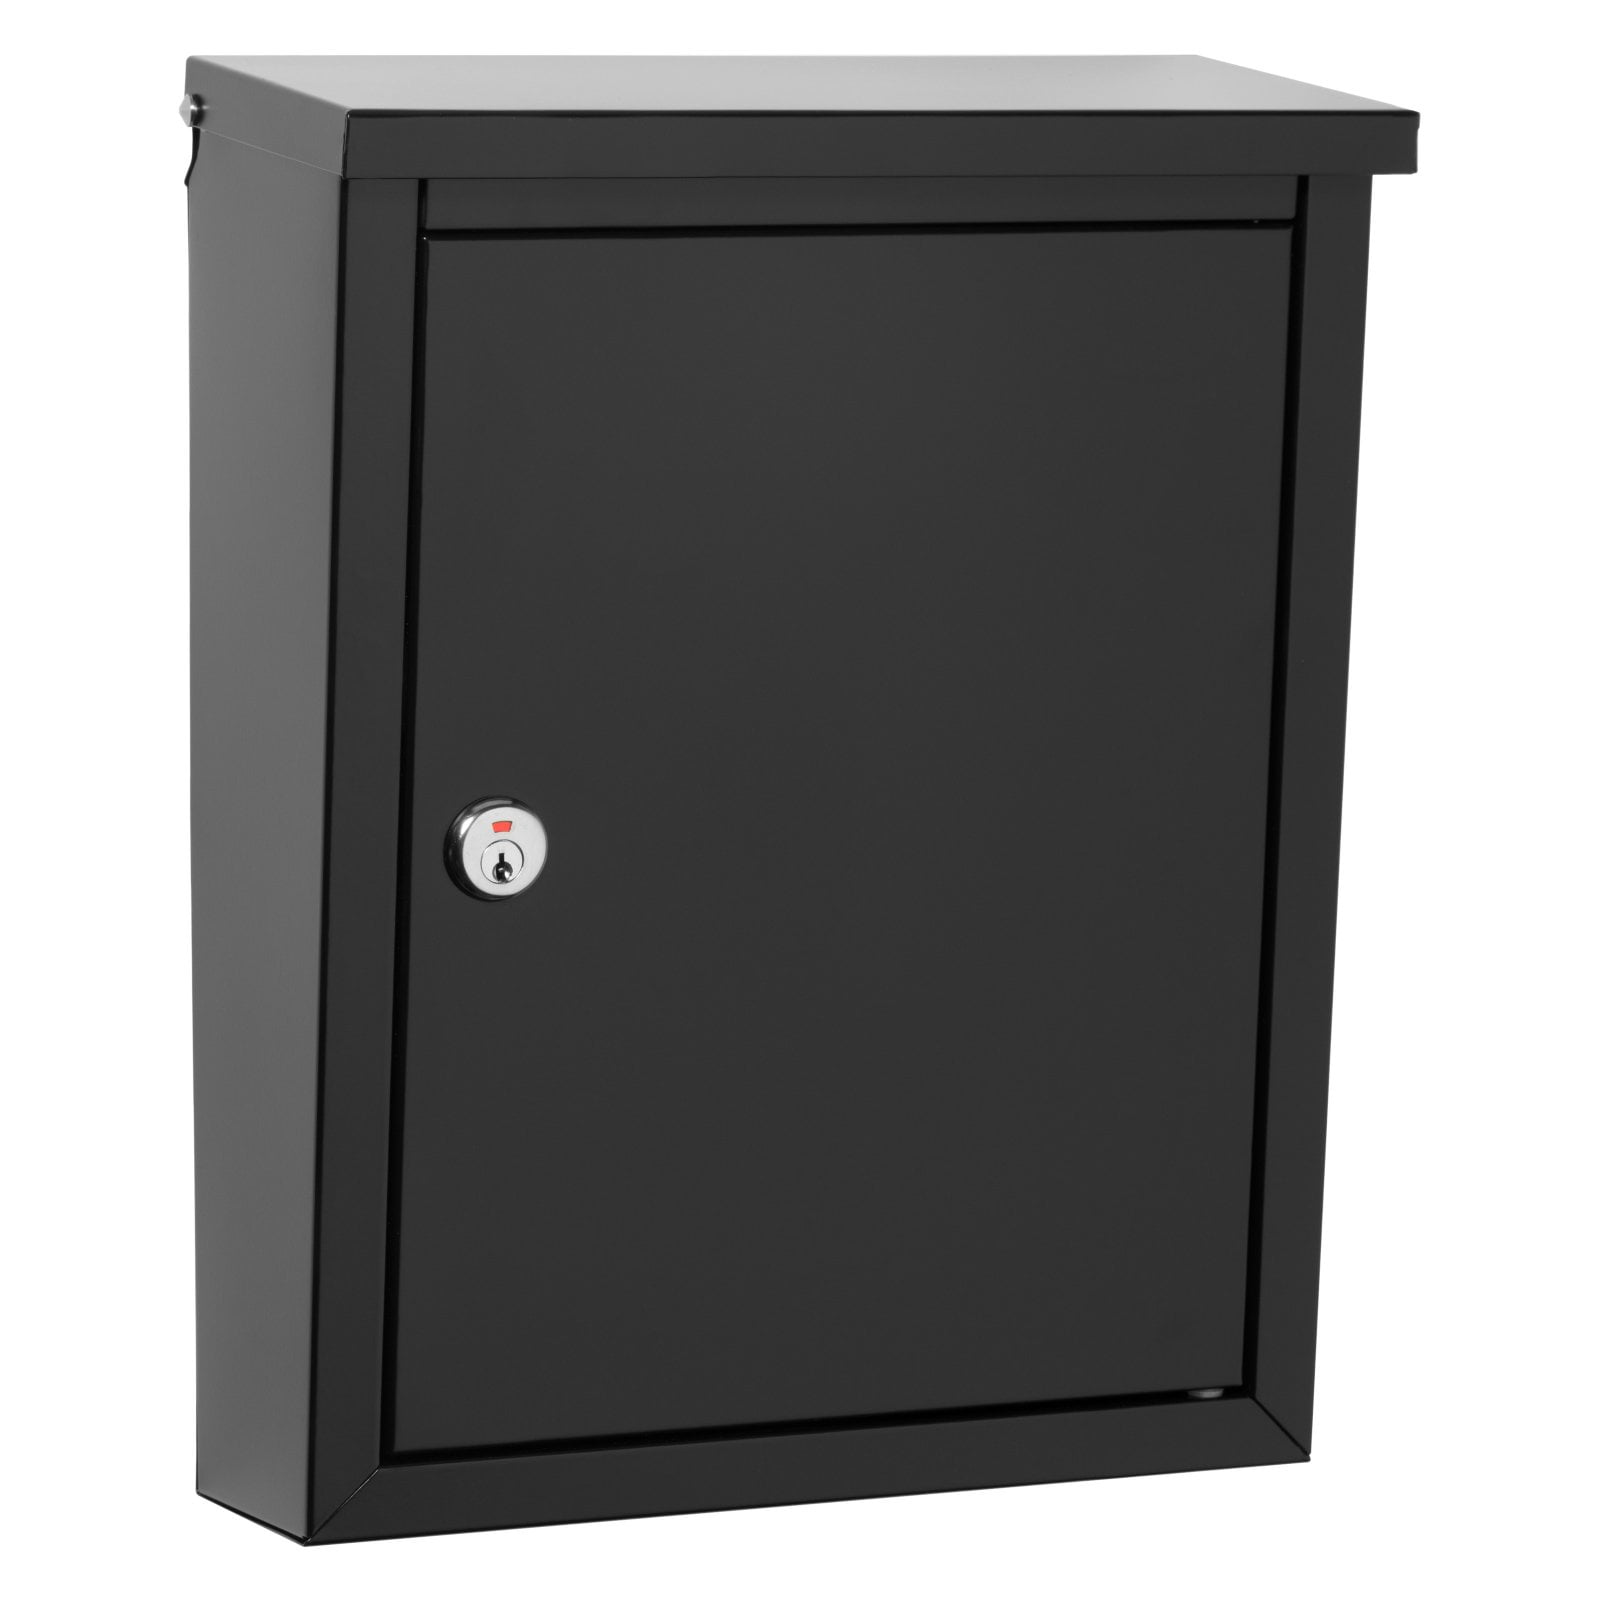 Picture of Architectural Mailboxes 2580B-10 Chelsea Wall-Mount Locking Mailbox - Black